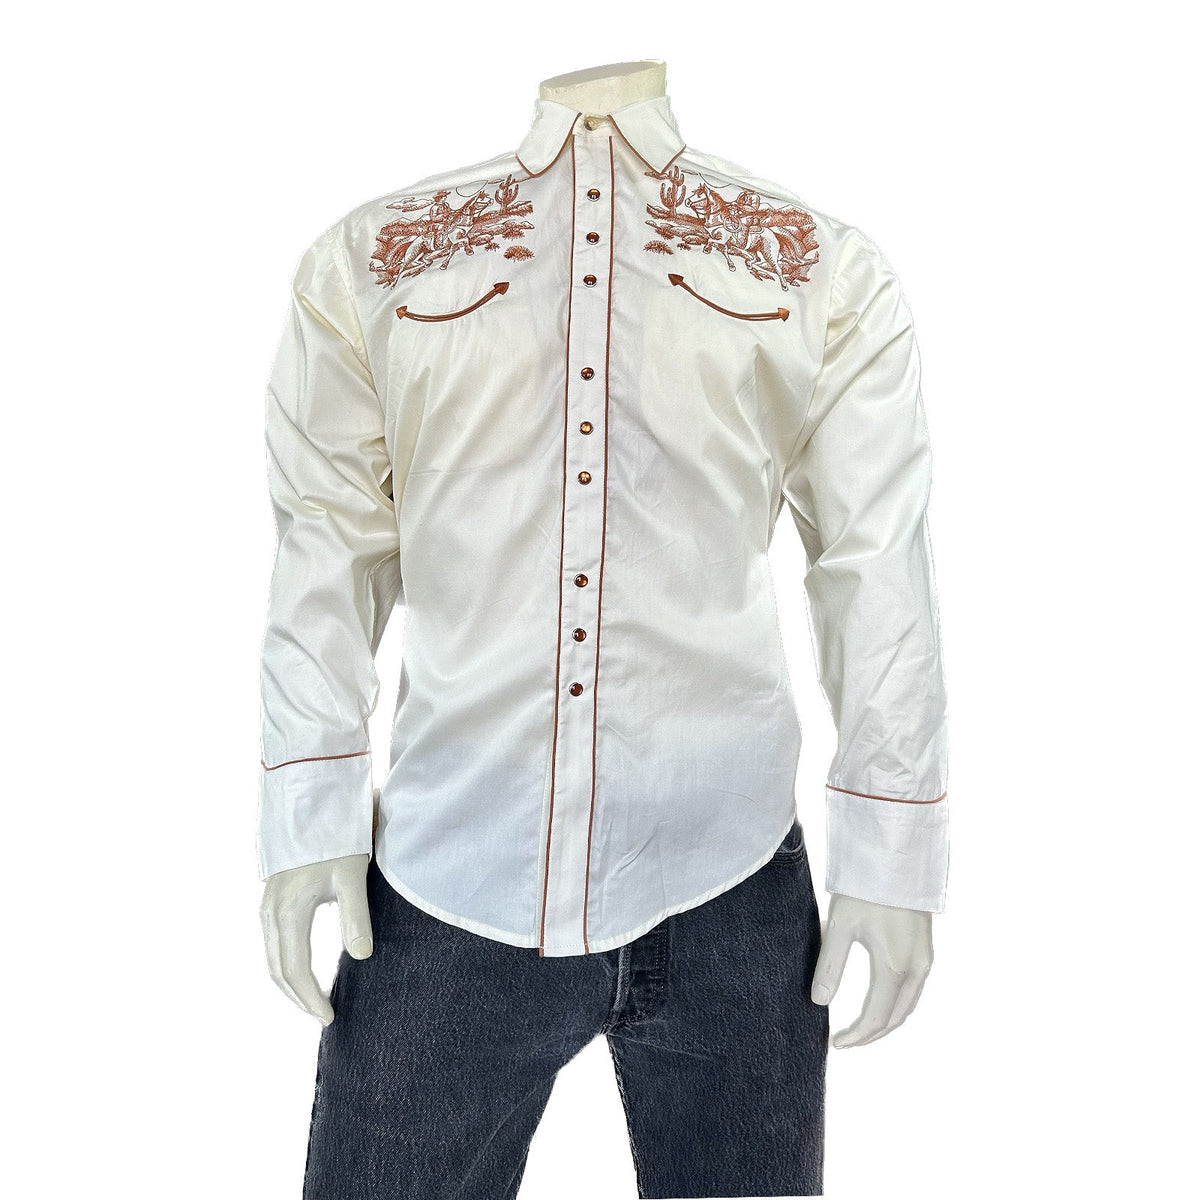 Rockmount Clothing Men's Ivory Vintage Rider Western Embroidery